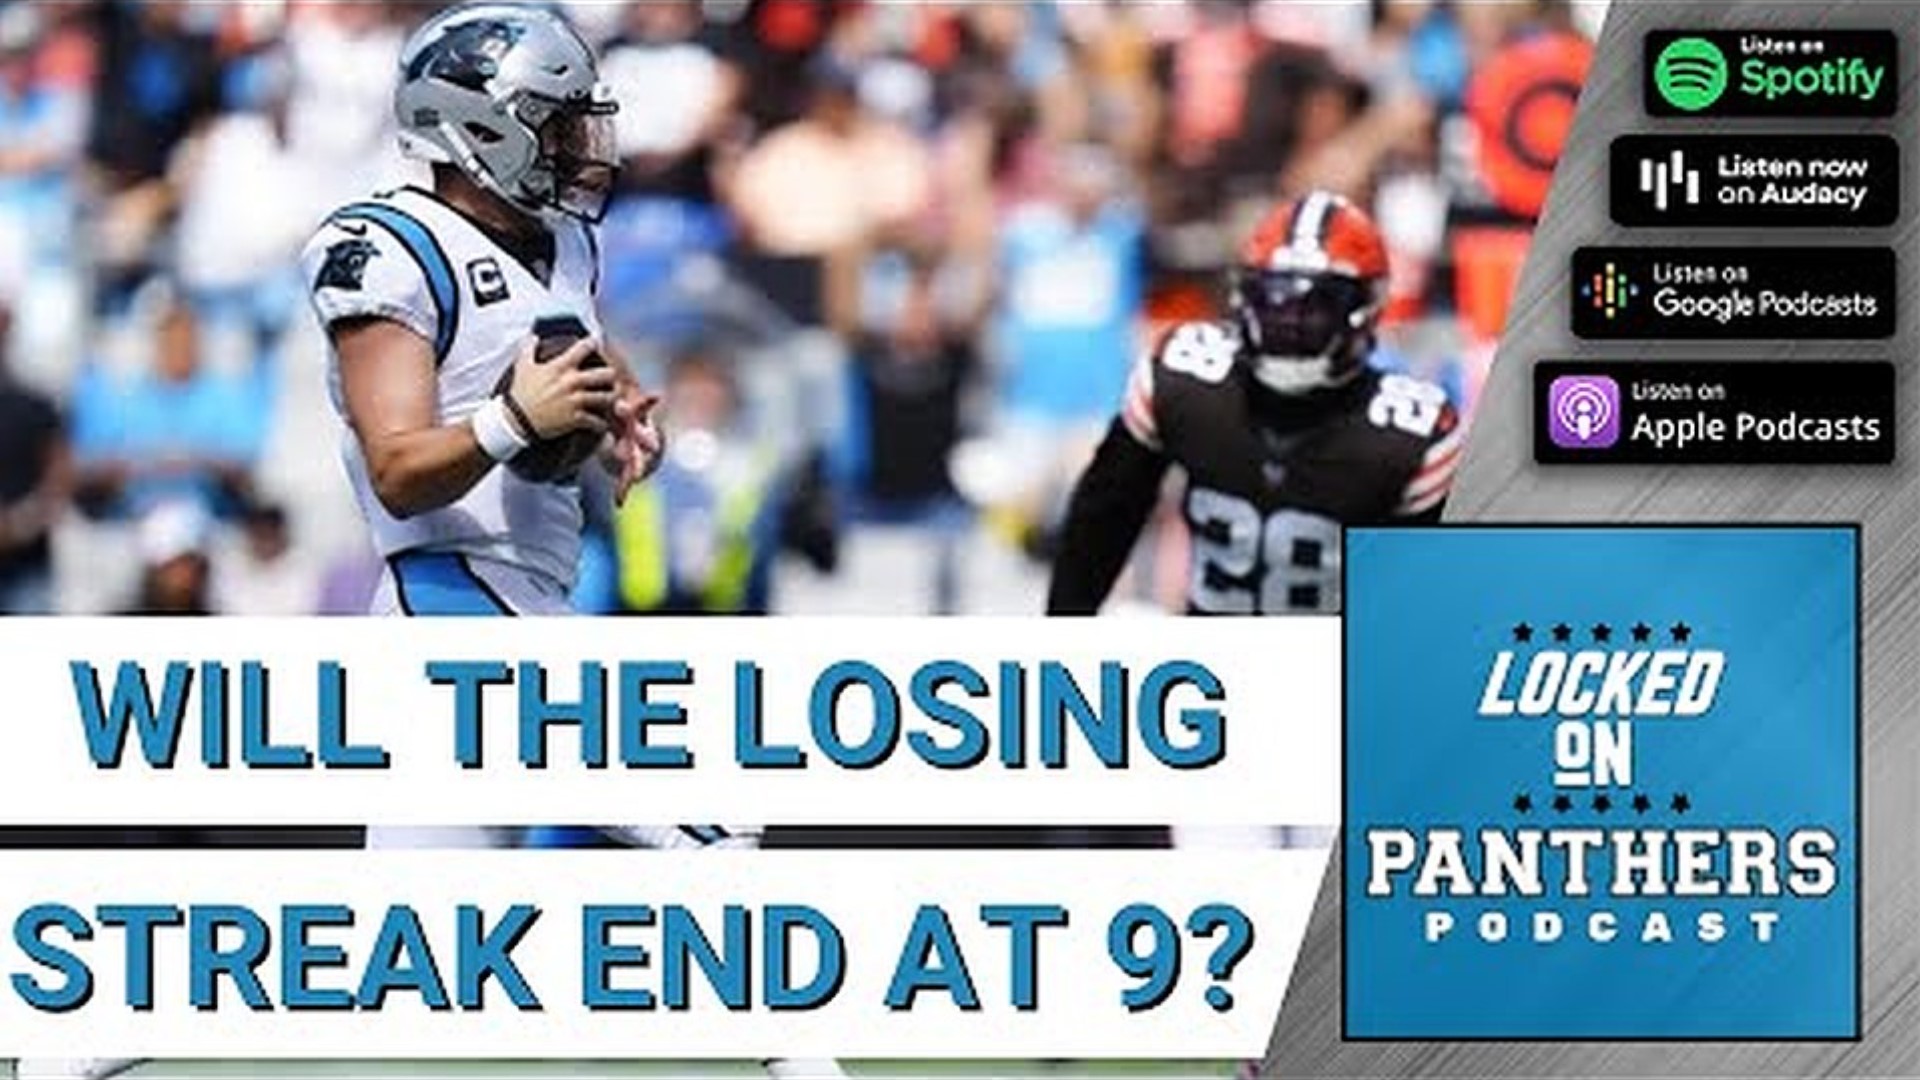 Can the Panthers win at home for the first time in over a calendar year?